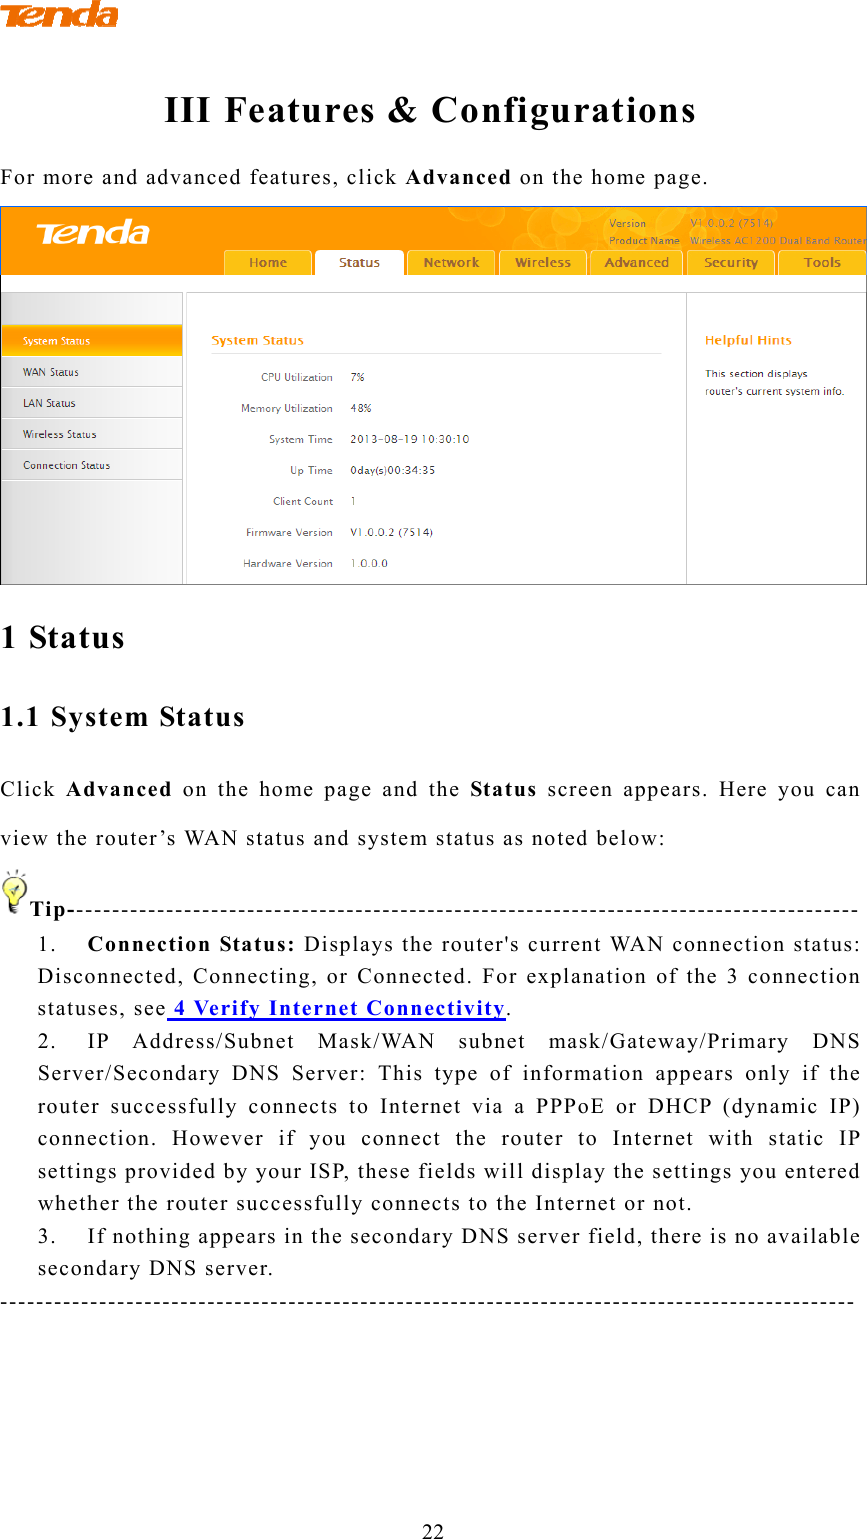               22 III Features &amp; Configurations For more and advanced features, click Advanced on the home page.  1 Status 1.1 System Status Click  Advanced on the home page and the Status screen appears. Here you can view the router’s WAN status and system status as noted below: Tip---------------------------------------------------------------------------------------- 1. Connection Status: Displays the router&apos;s current WAN connection status: Disconnected, Connecting, or Connected. For explanation of the 3 connection statuses, see 4 Verify Internet Connectivity. 2. IP Address/Subnet Mask/WAN subnet mask/Gateway/Primary DNS Server/Secondary DNS Server: This type of information appears only if the router successfully connects to Internet via a PPPoE or DHCP (dynamic IP) connection. However if you connect the router to Internet with static IP settings provided by your ISP, these fields will display the settings you entered whether the router successfully connects to the Internet or not. 3. If nothing appears in the secondary DNS server field, there is no available secondary DNS server. -----------------------------------------------------------------------------------------------  